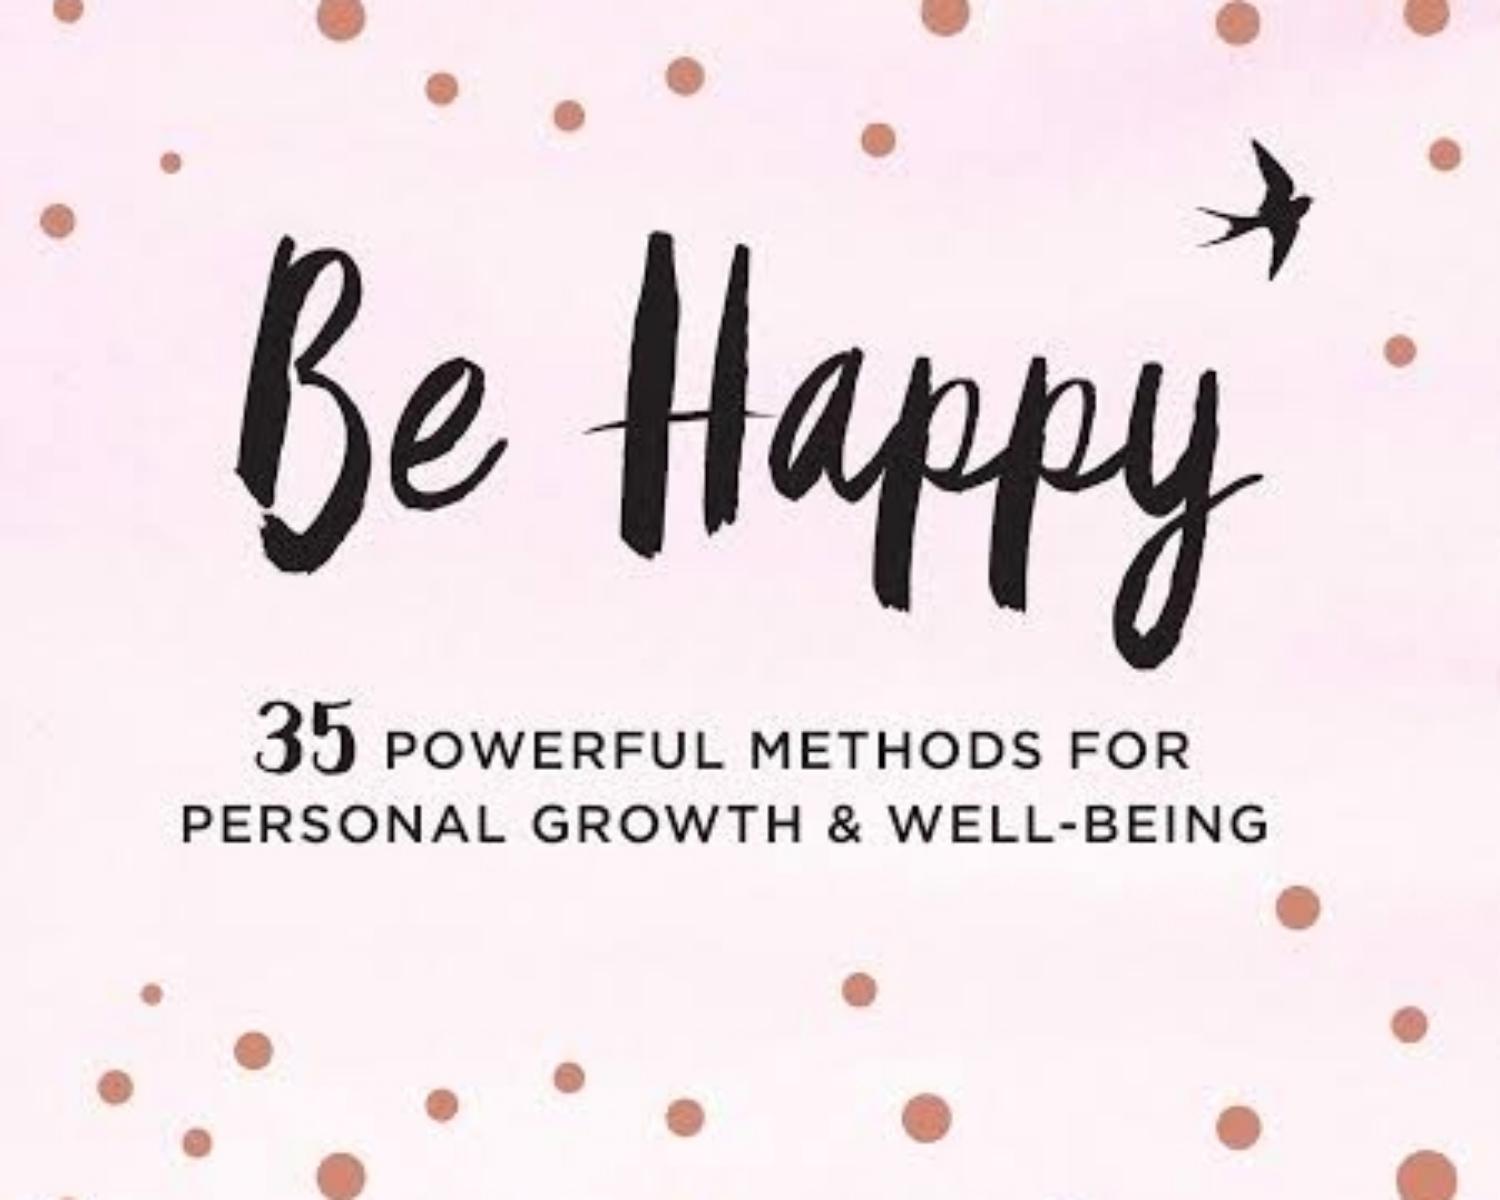 Be Happy: 35 Powerful Methods for Personal Growth & Well-Being